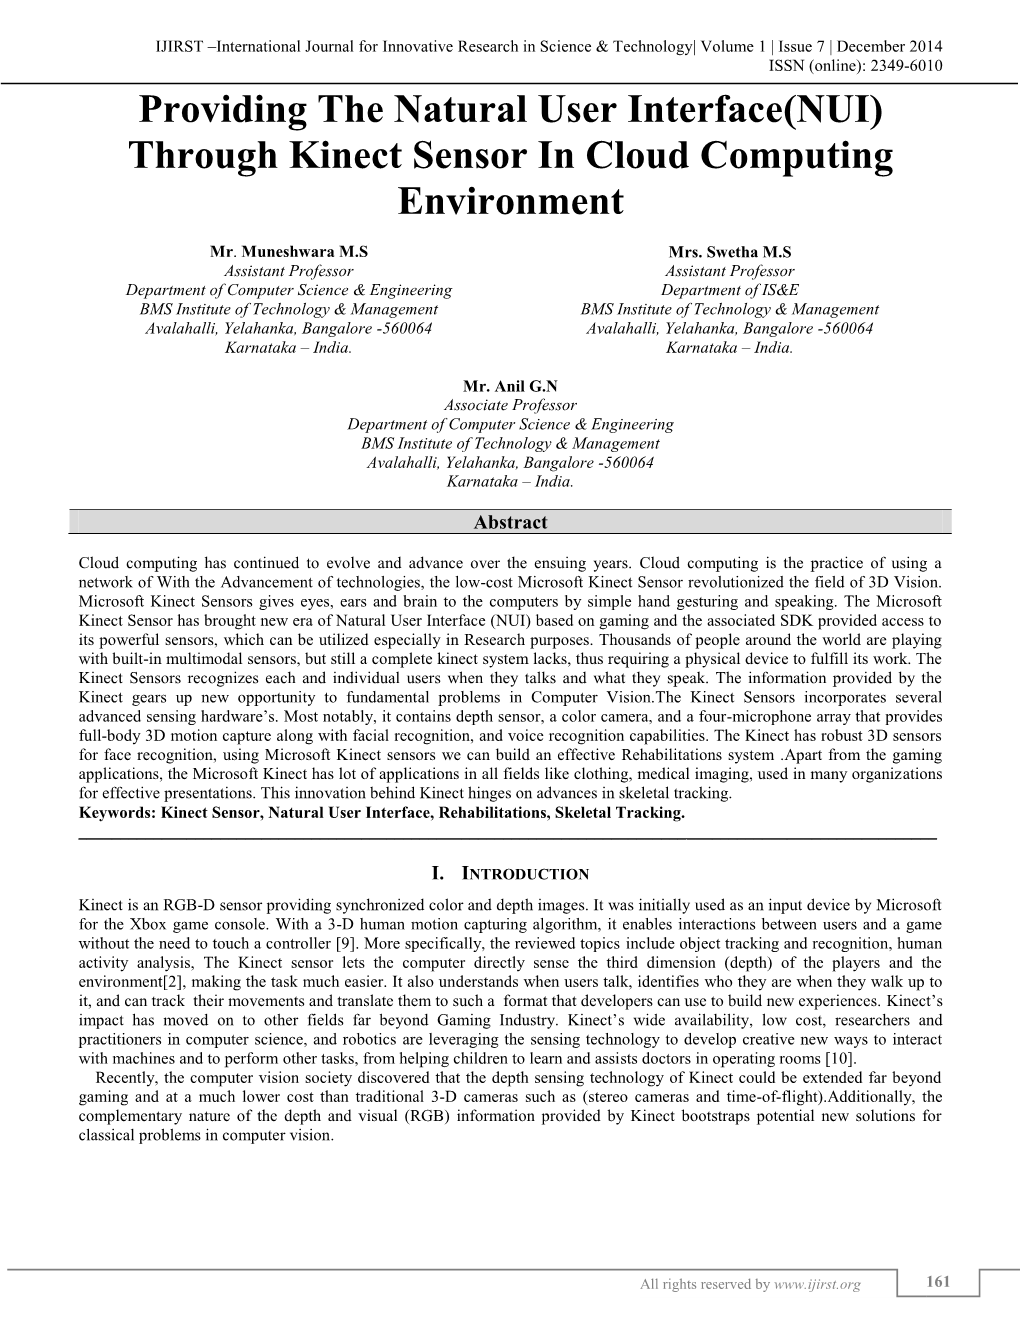 Providing the Natural User Interface(NUI) Through Kinect Sensor in Cloud Computing Environment (IJIRST/ Volume 1 / Issue 7 / 033)